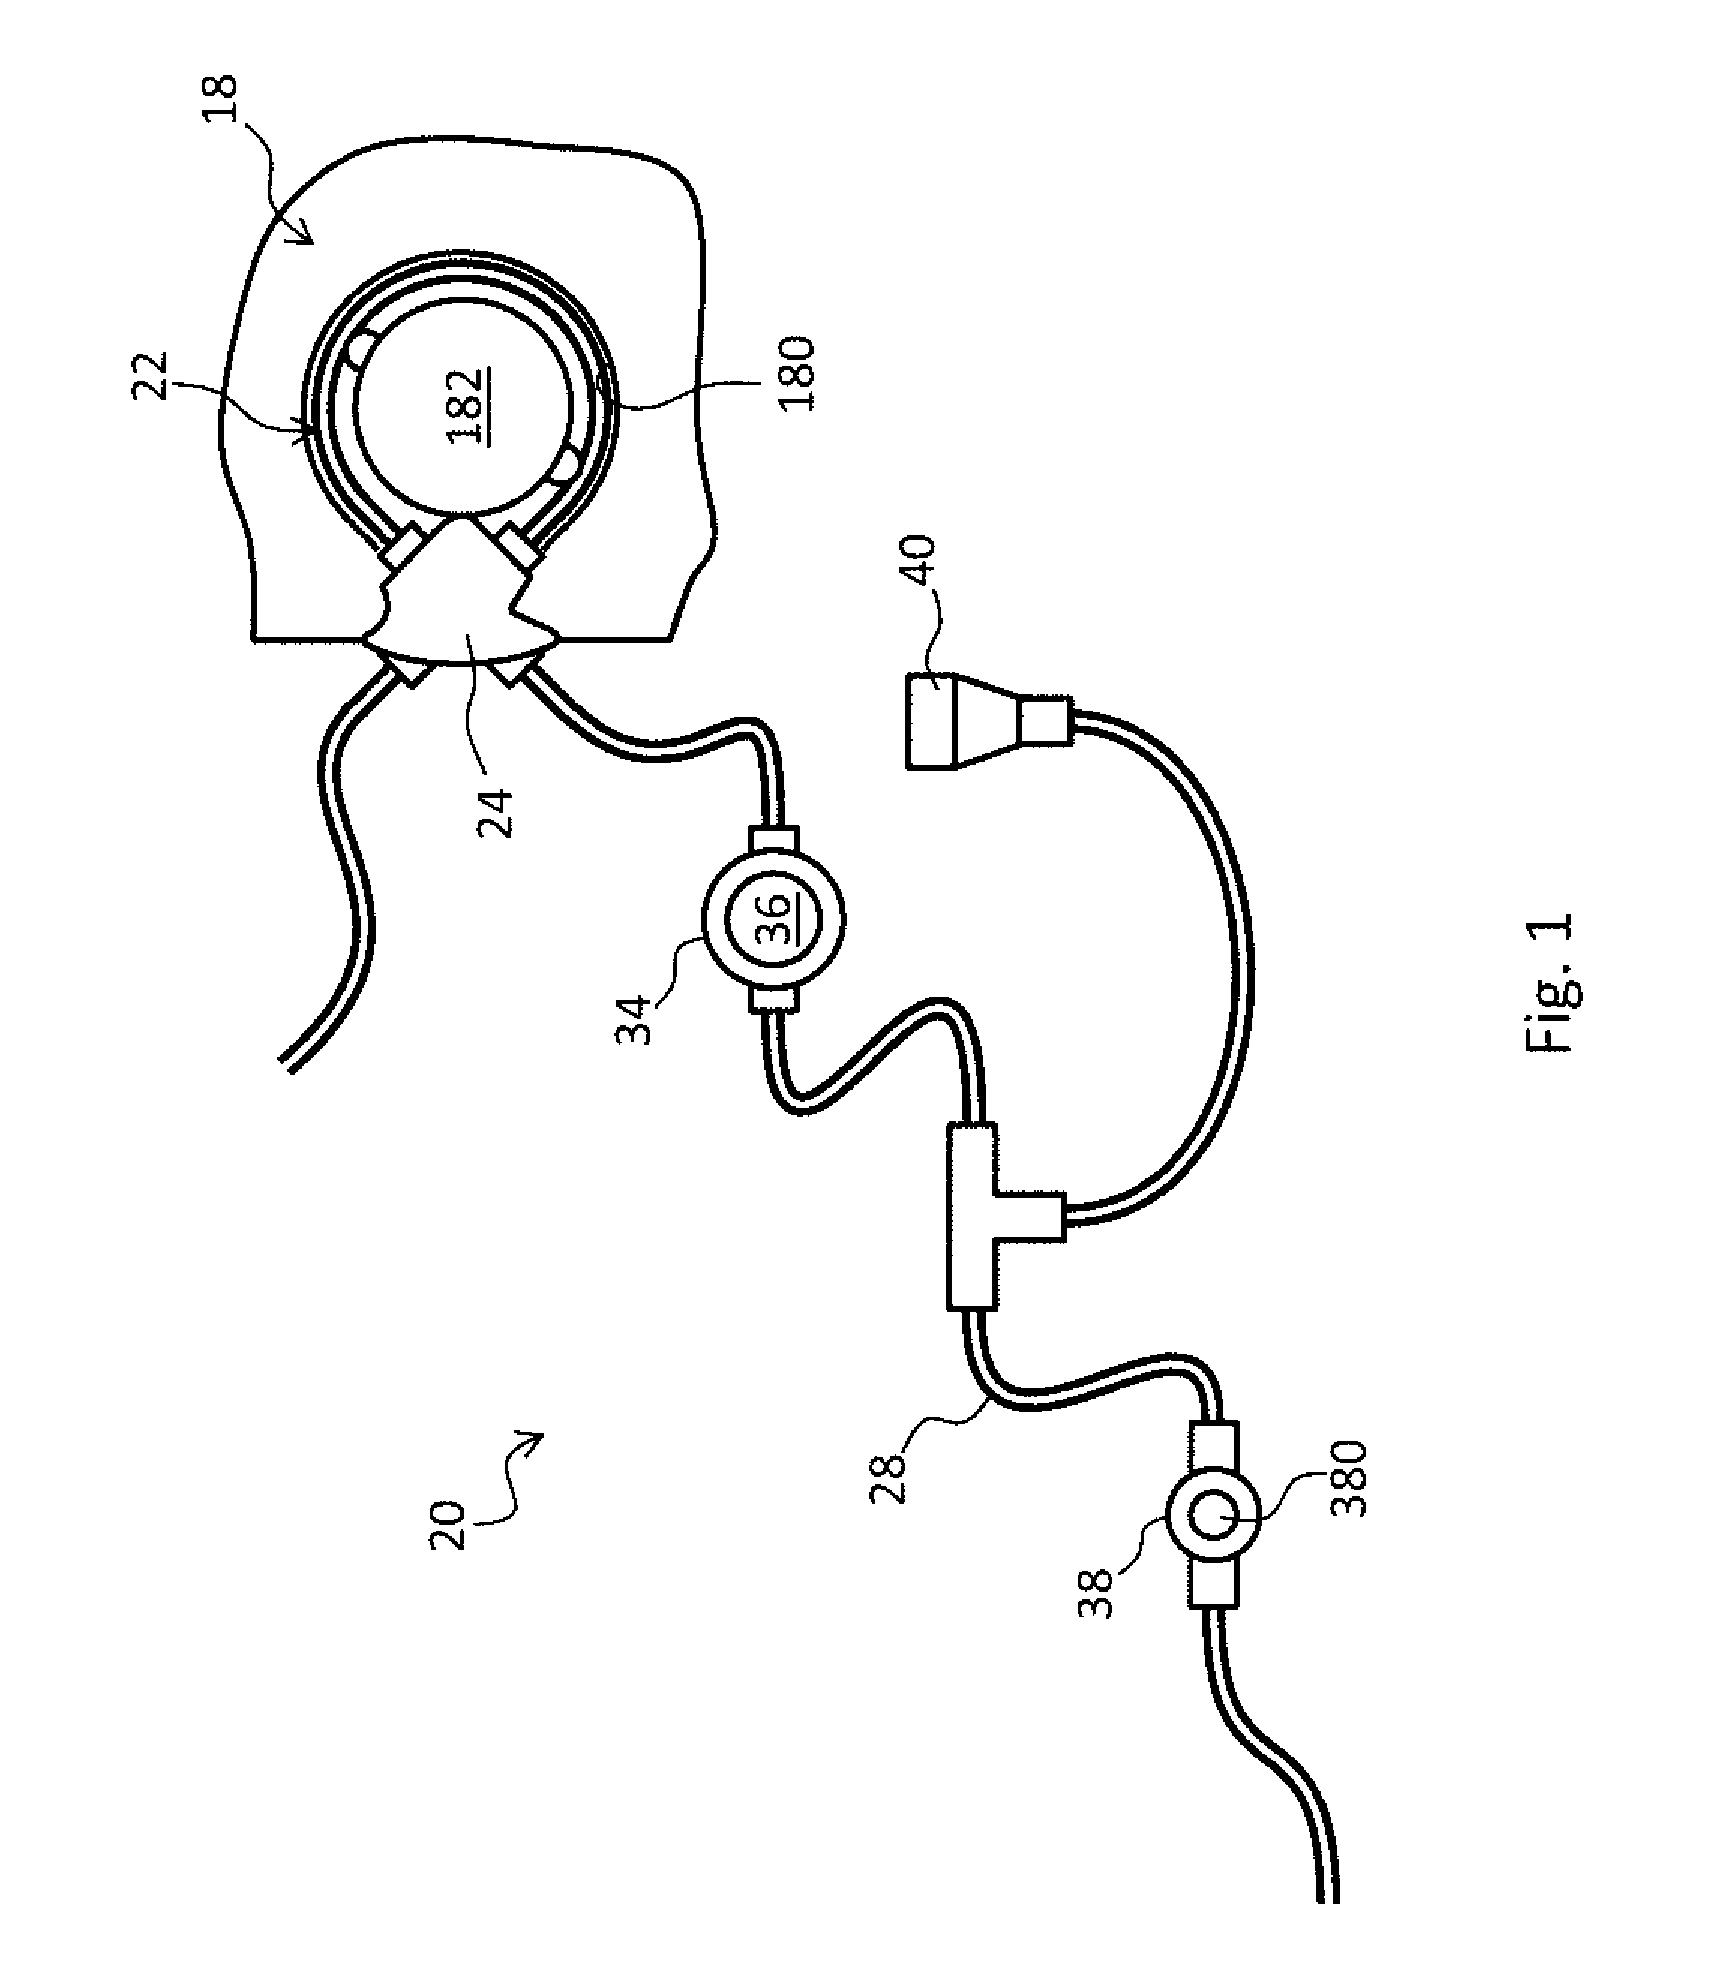 Tube for extra-corporeal circuit with double connector